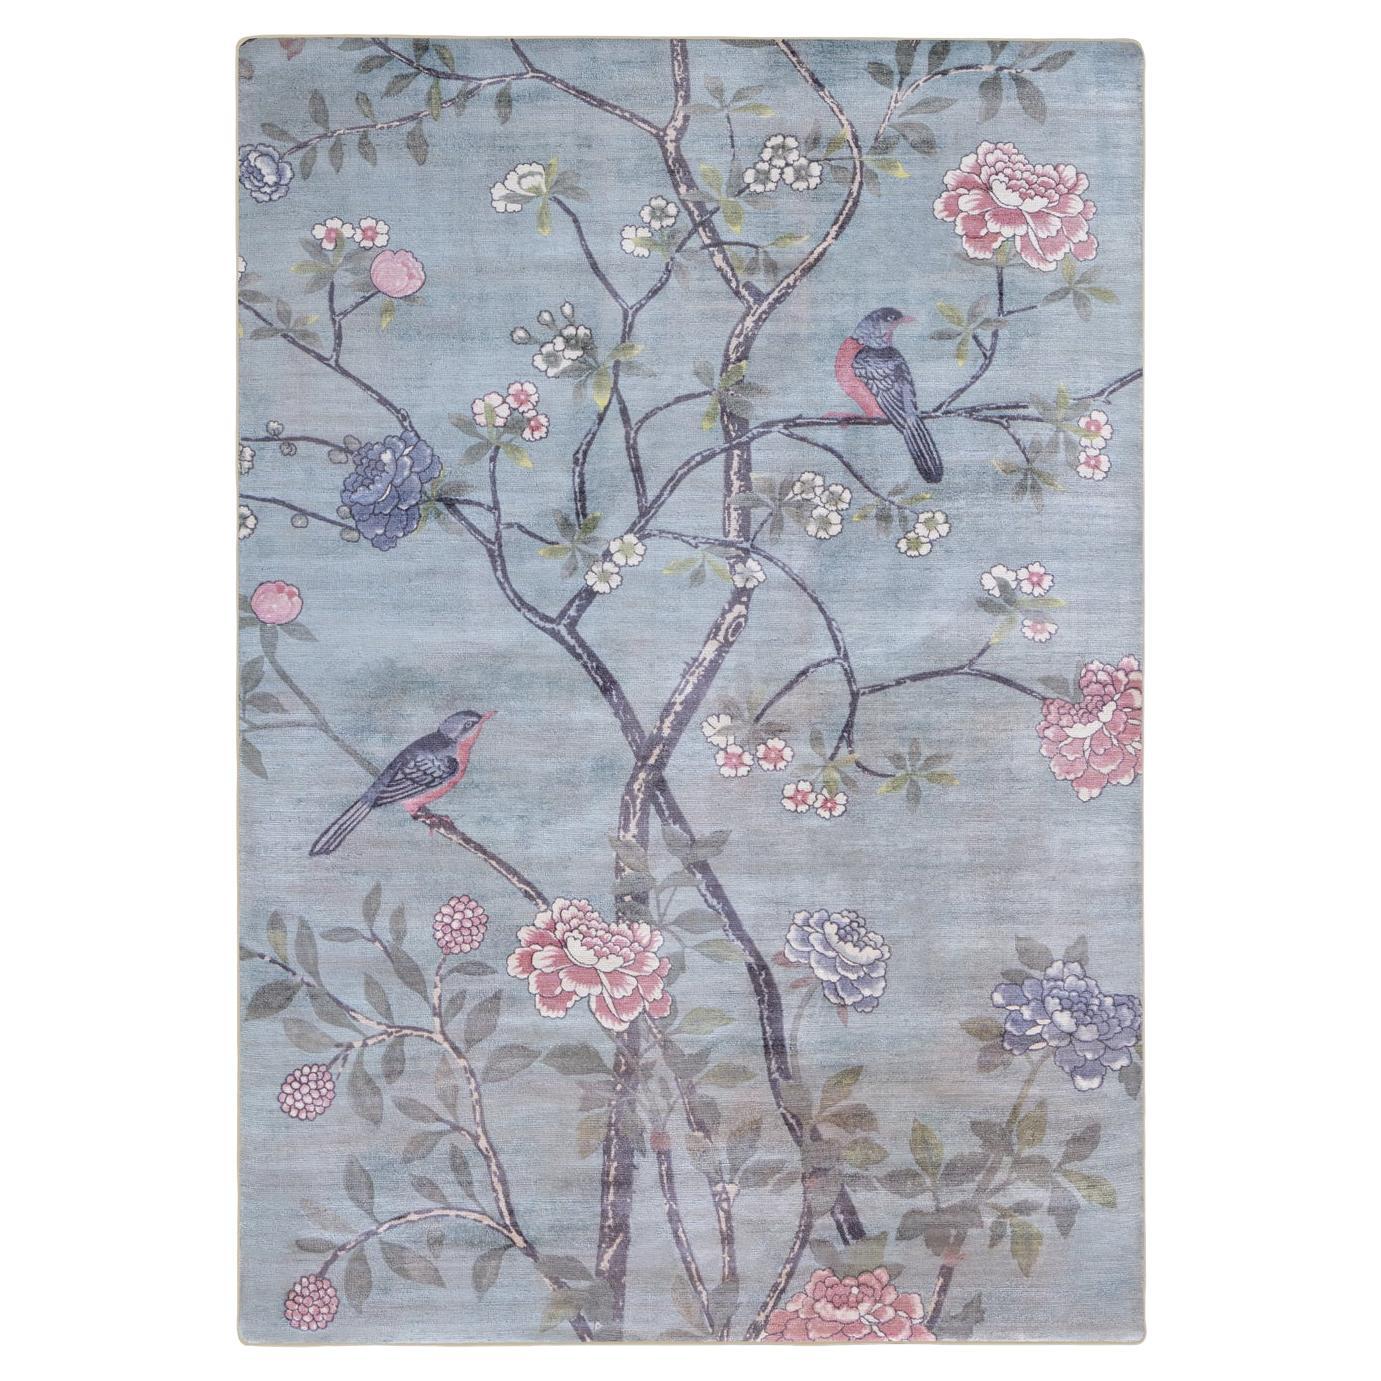 Contemporary Japanese Style Drawings Colorful Rug by Deanna Comellini 300x400 cm For Sale